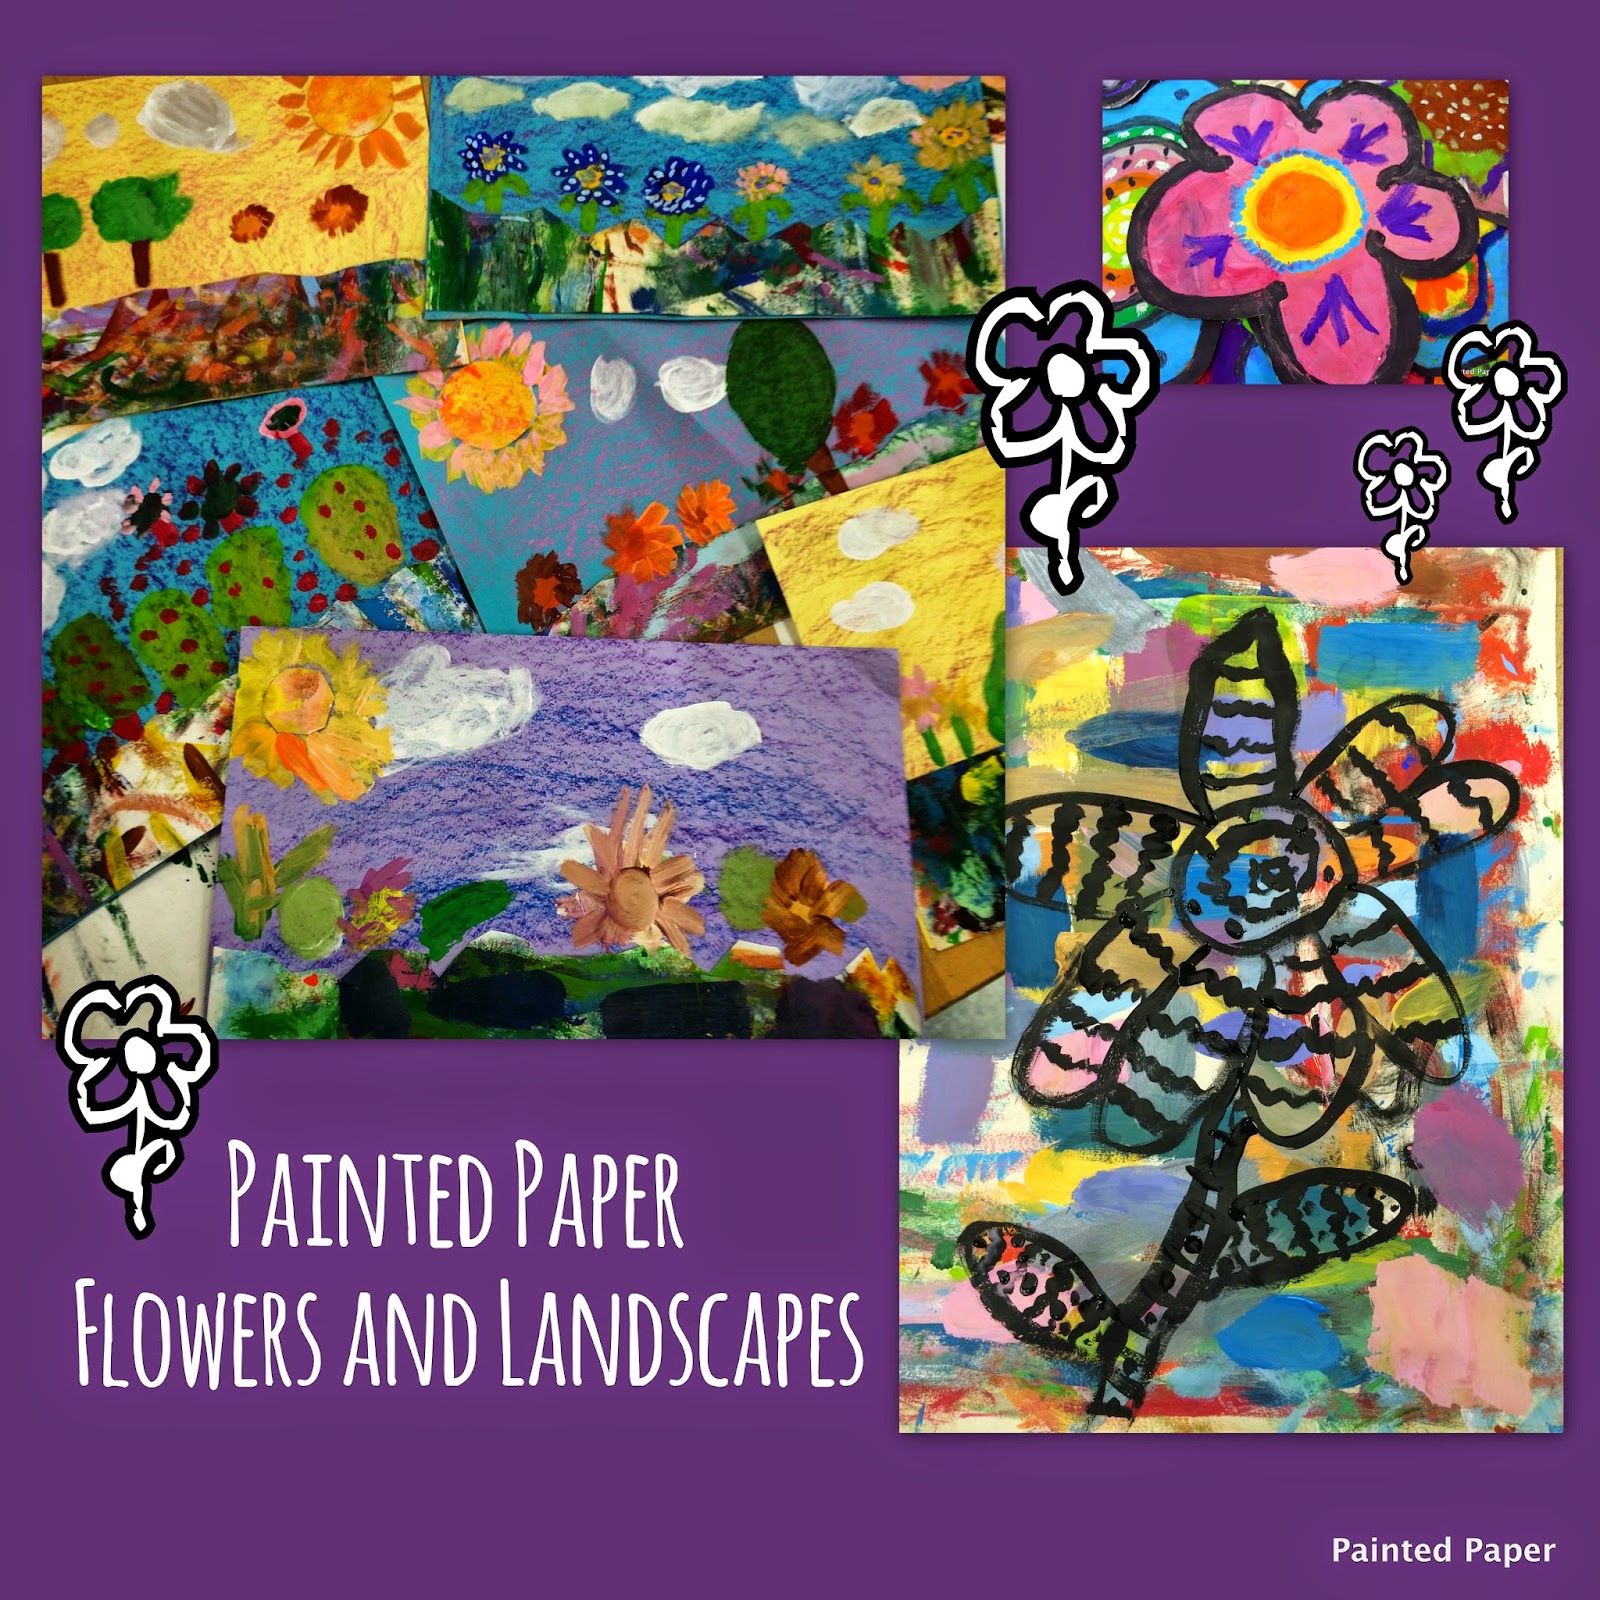 Painted Placemats projects-002